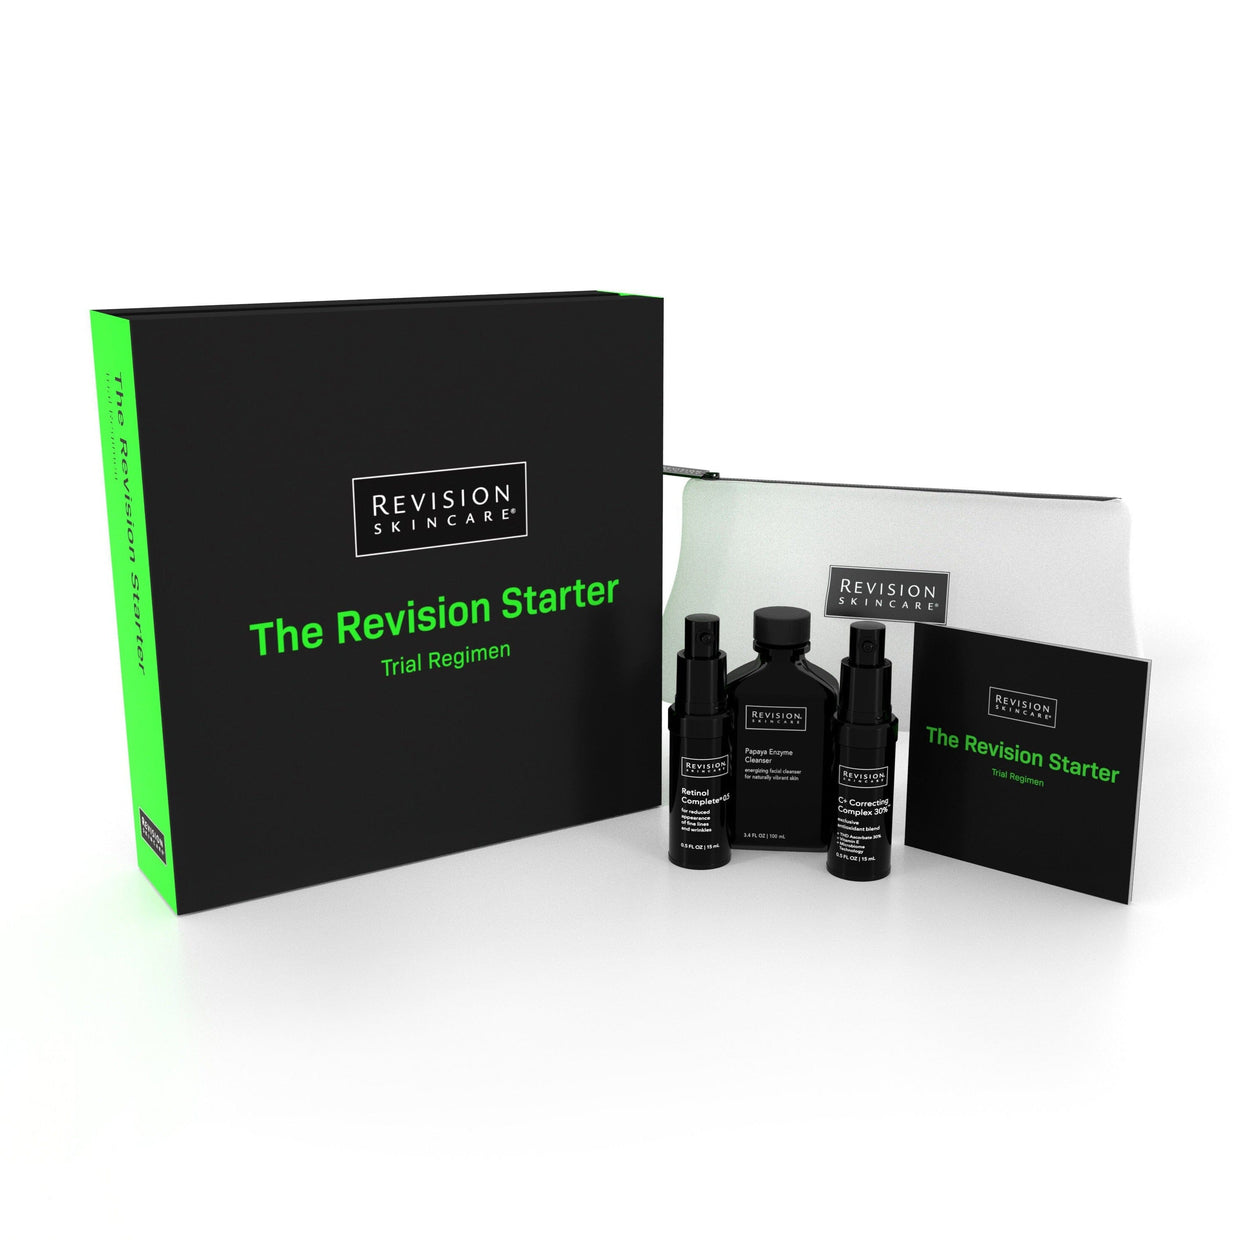 Revision Skincare The Revision Starter Limited Edition Trial Regimen Revision Shop at Exclusive Beauty Club